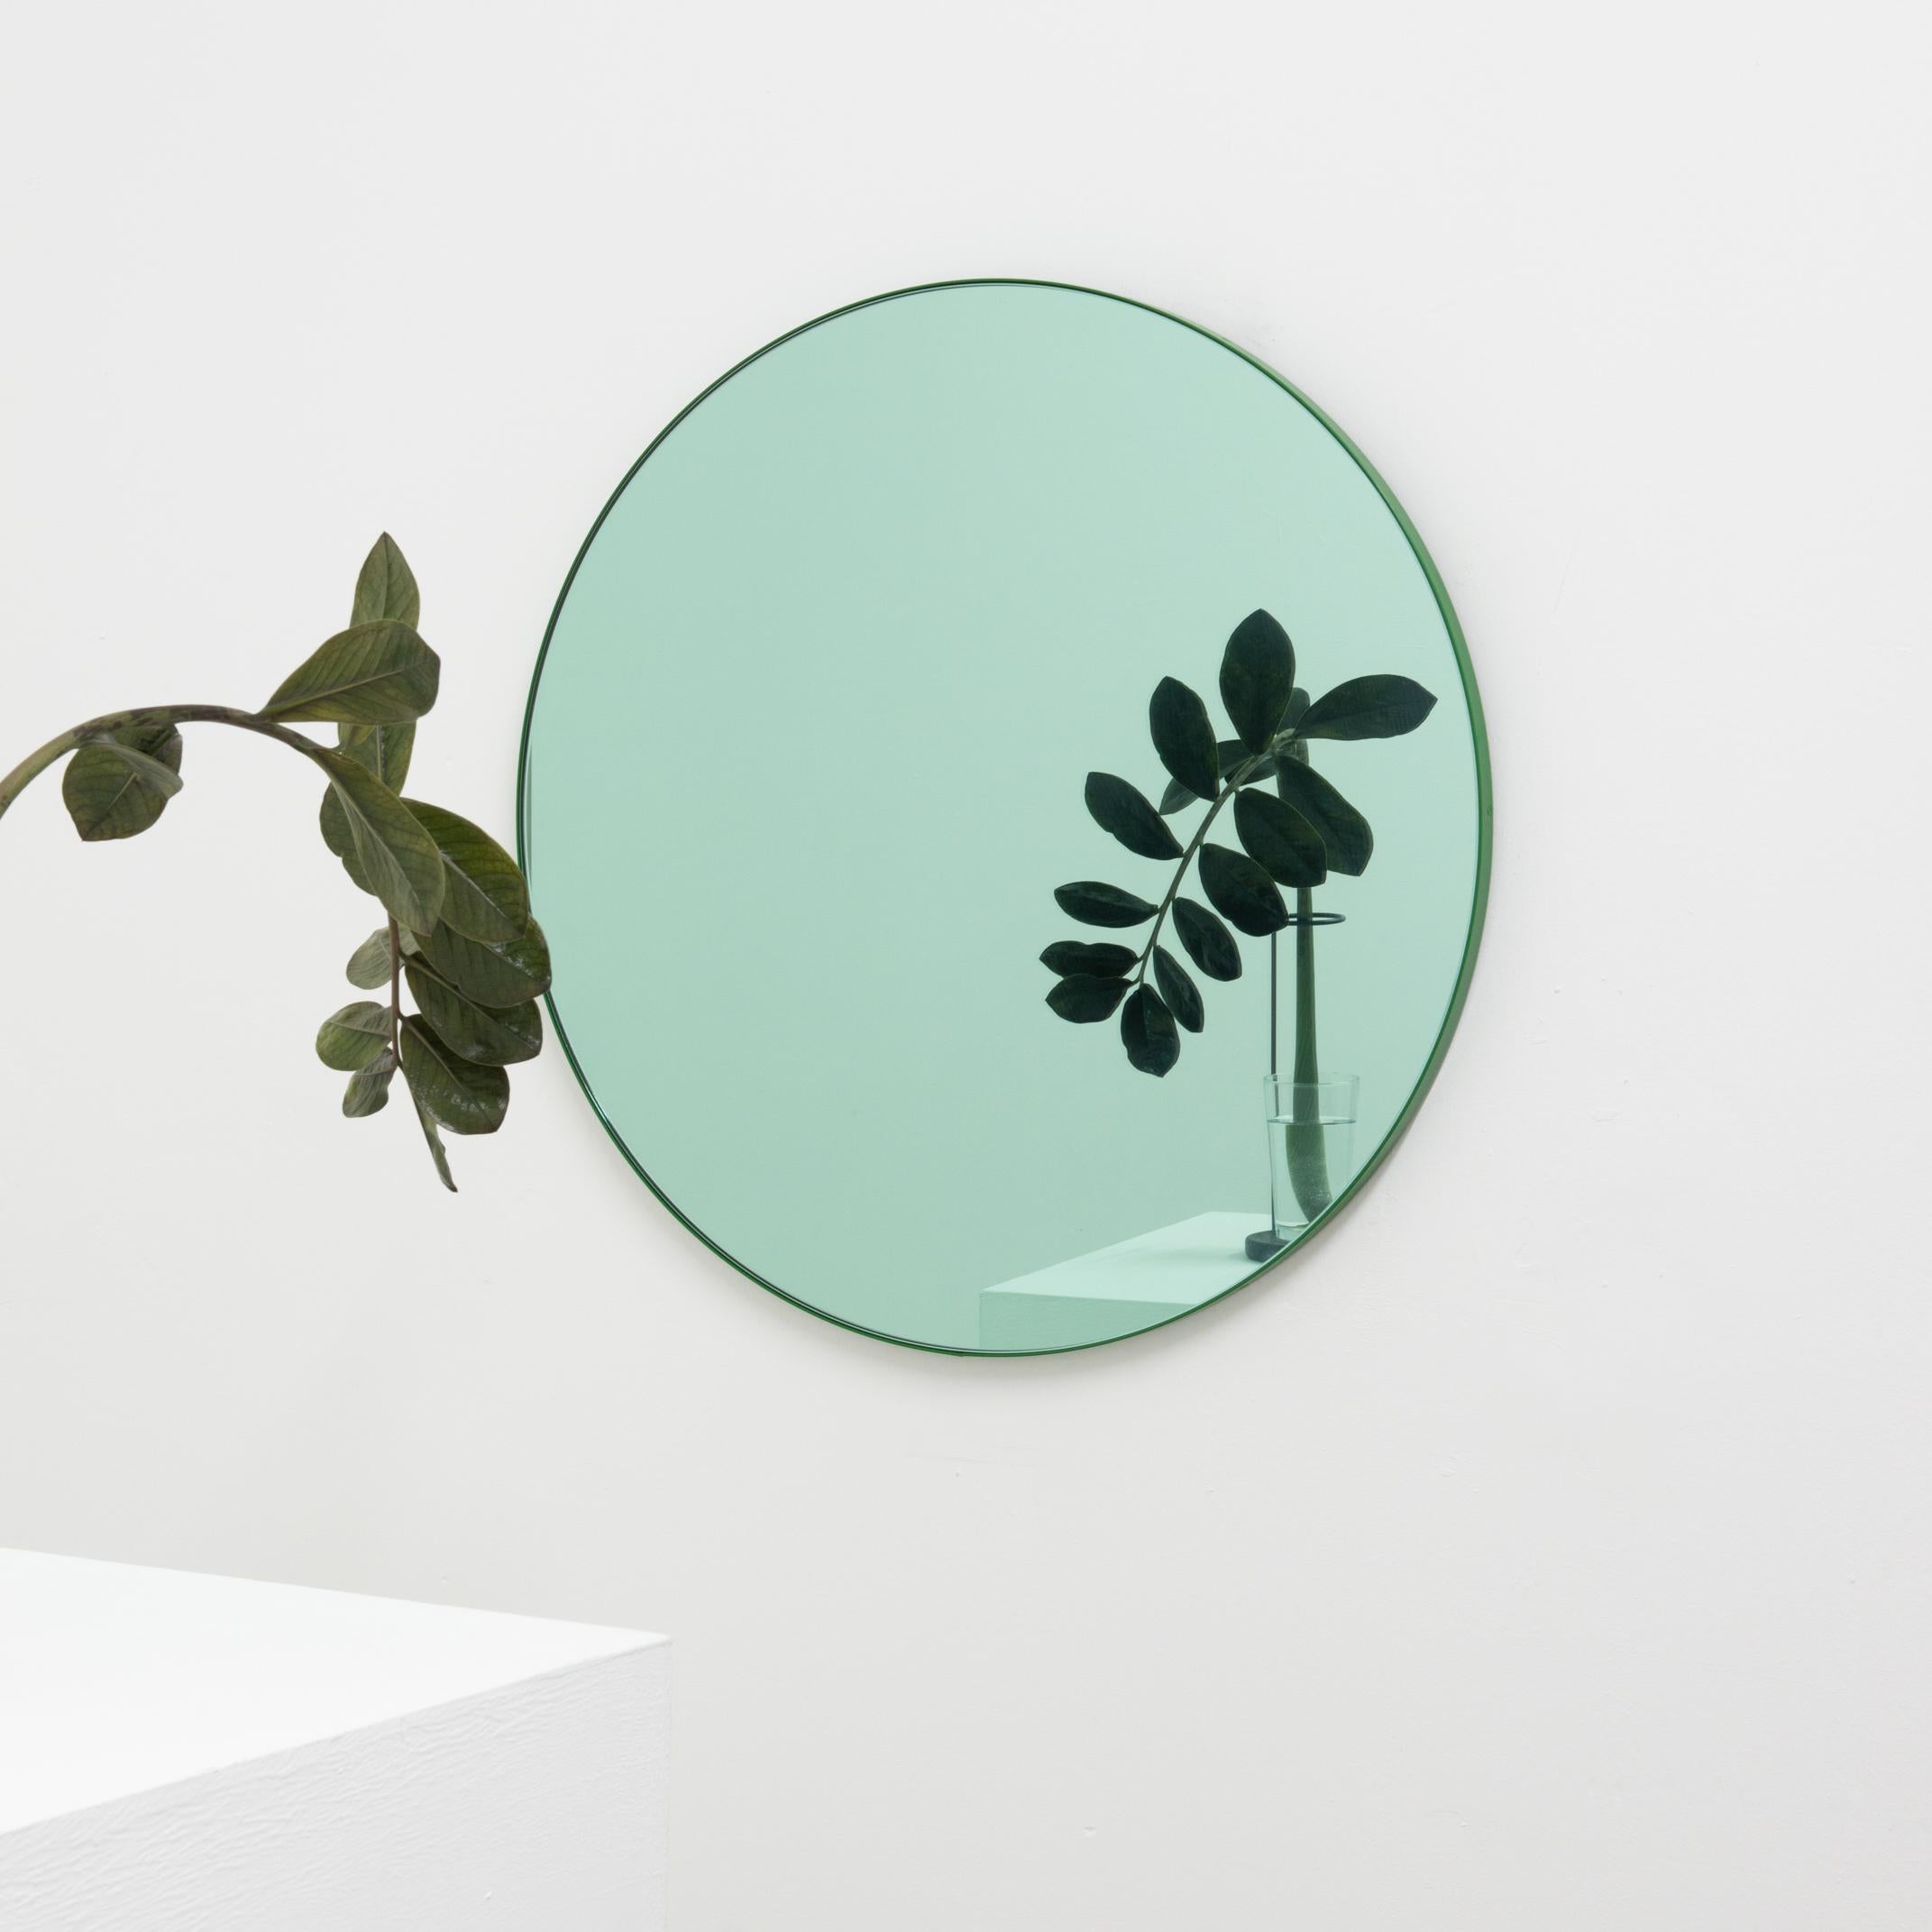 Powder-Coated Orbis Green Tinted Modern Round Mirror with Green Frame, Small